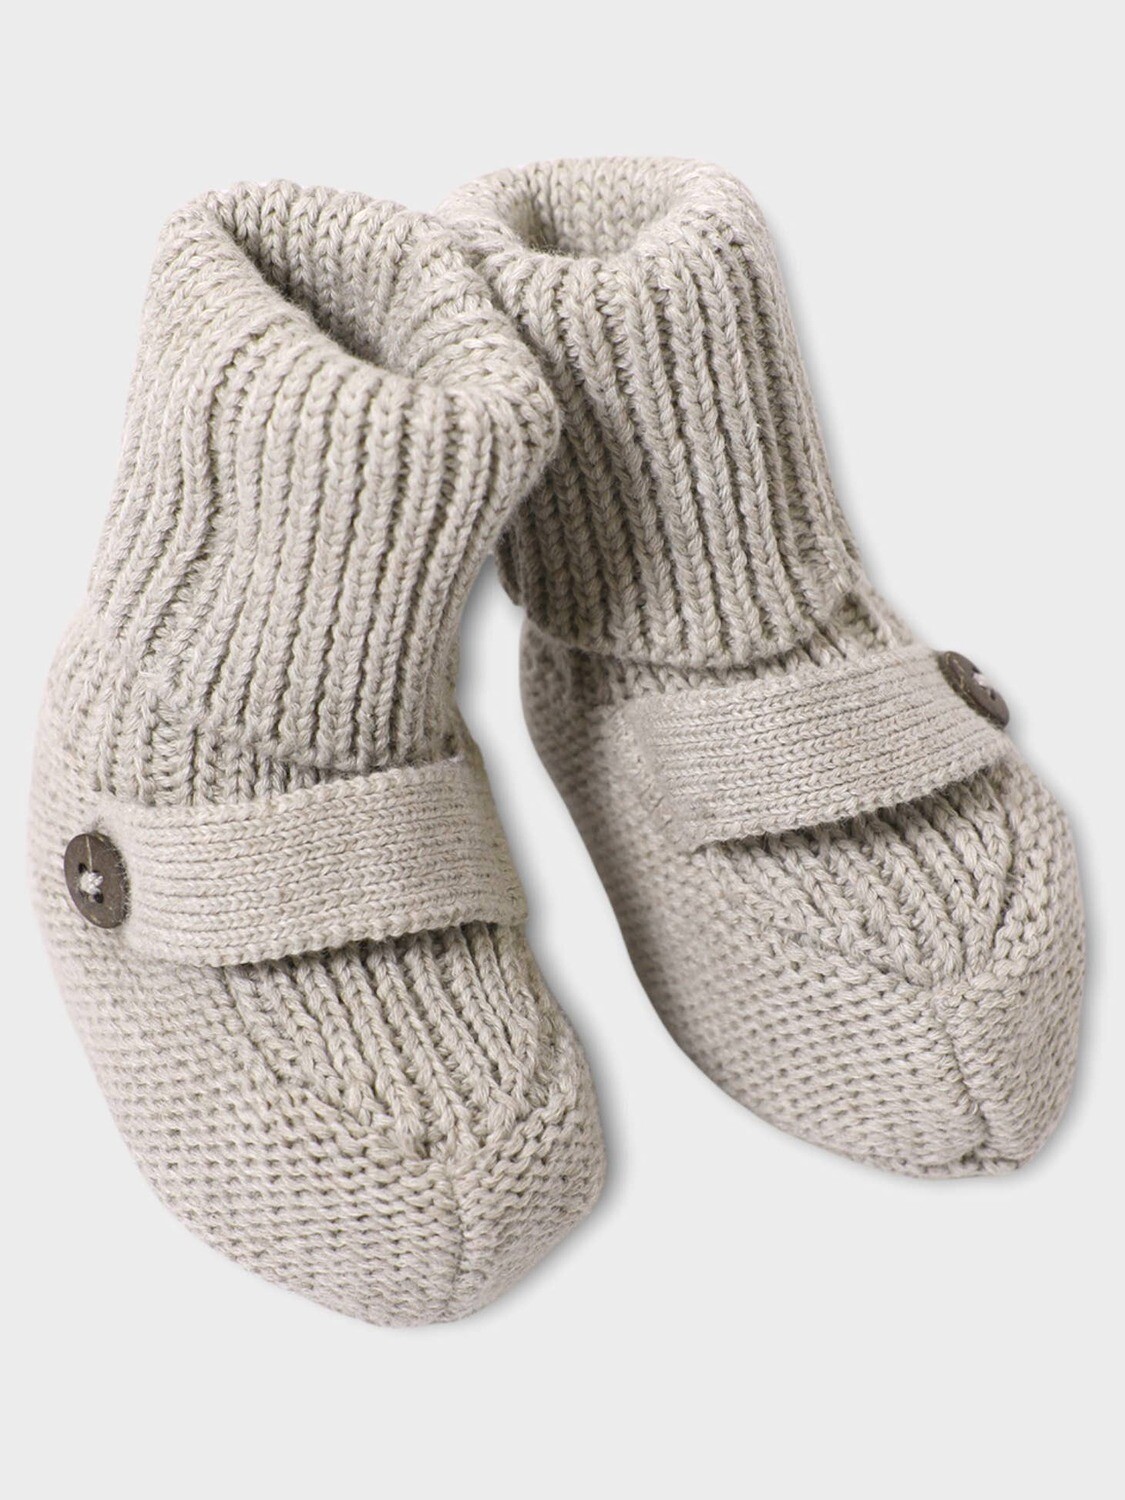 Milan Earthy Baby Booties Knit Sweater